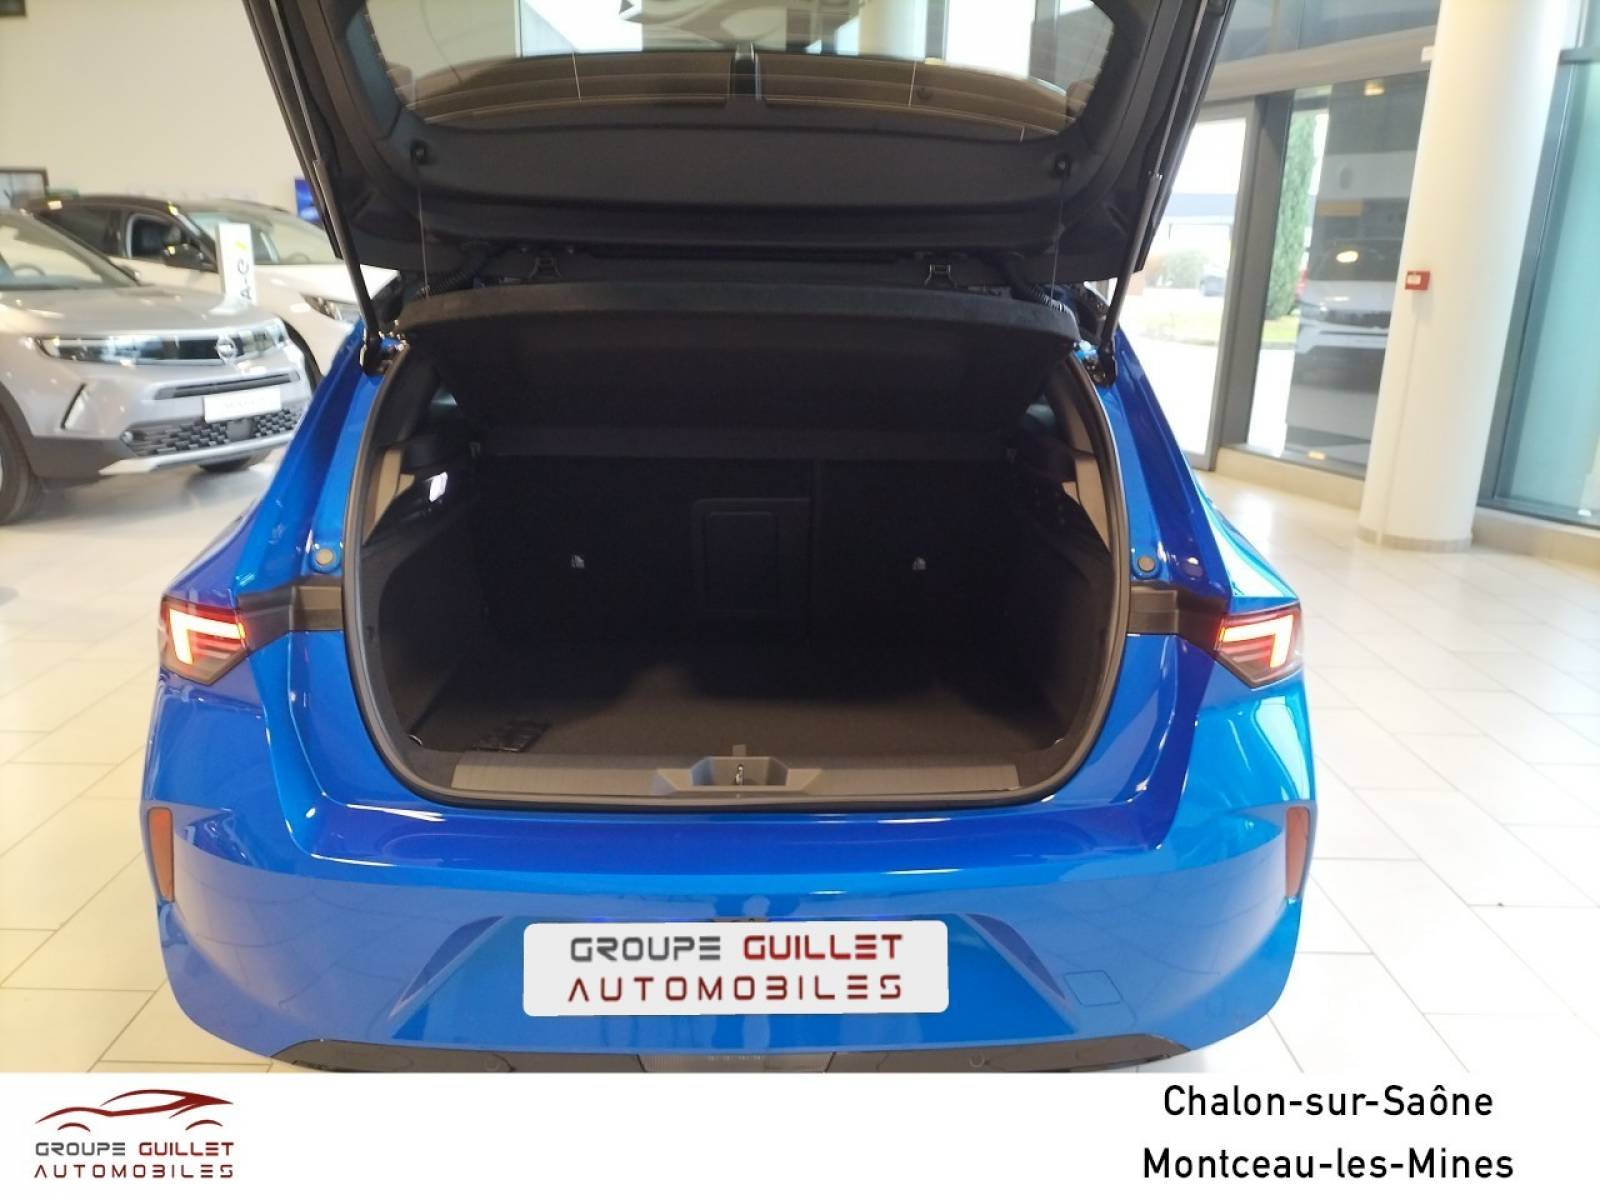 OPEL Astra Electrique 156 ch & Batterie 54 kWh - véhicule d'occasion - Groupe Guillet - Opel Magicauto Chalon - 71380 - Saint-Marcel - 6